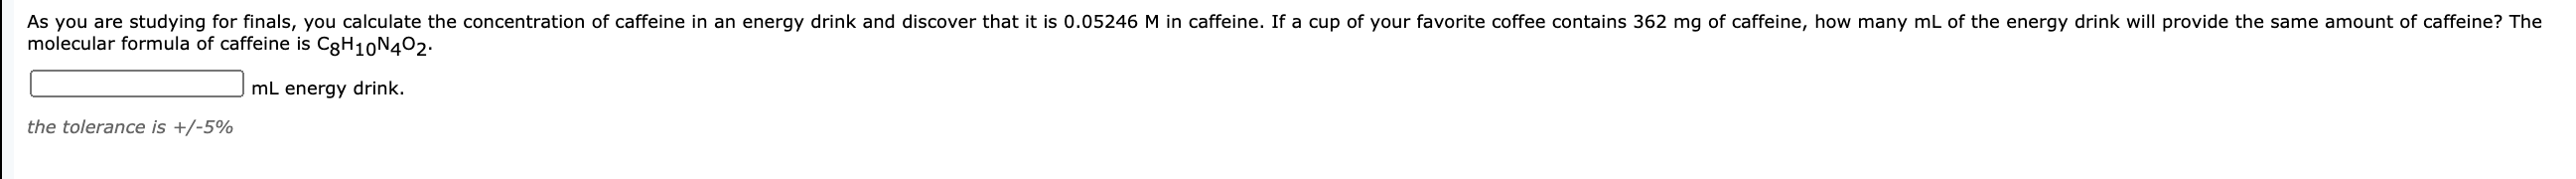 As you are studying for finals, you calculate the concentration of caffeine in an energy drink and discover that it is 0.05246 M in caffeine. If a cup of your favorite coffee contains 362 mg of caffeine, how many mL of the energy drink will provide the same amount of caffeine? The
molecular formula of caffeine is CgH10N402:
mL energy drink.
